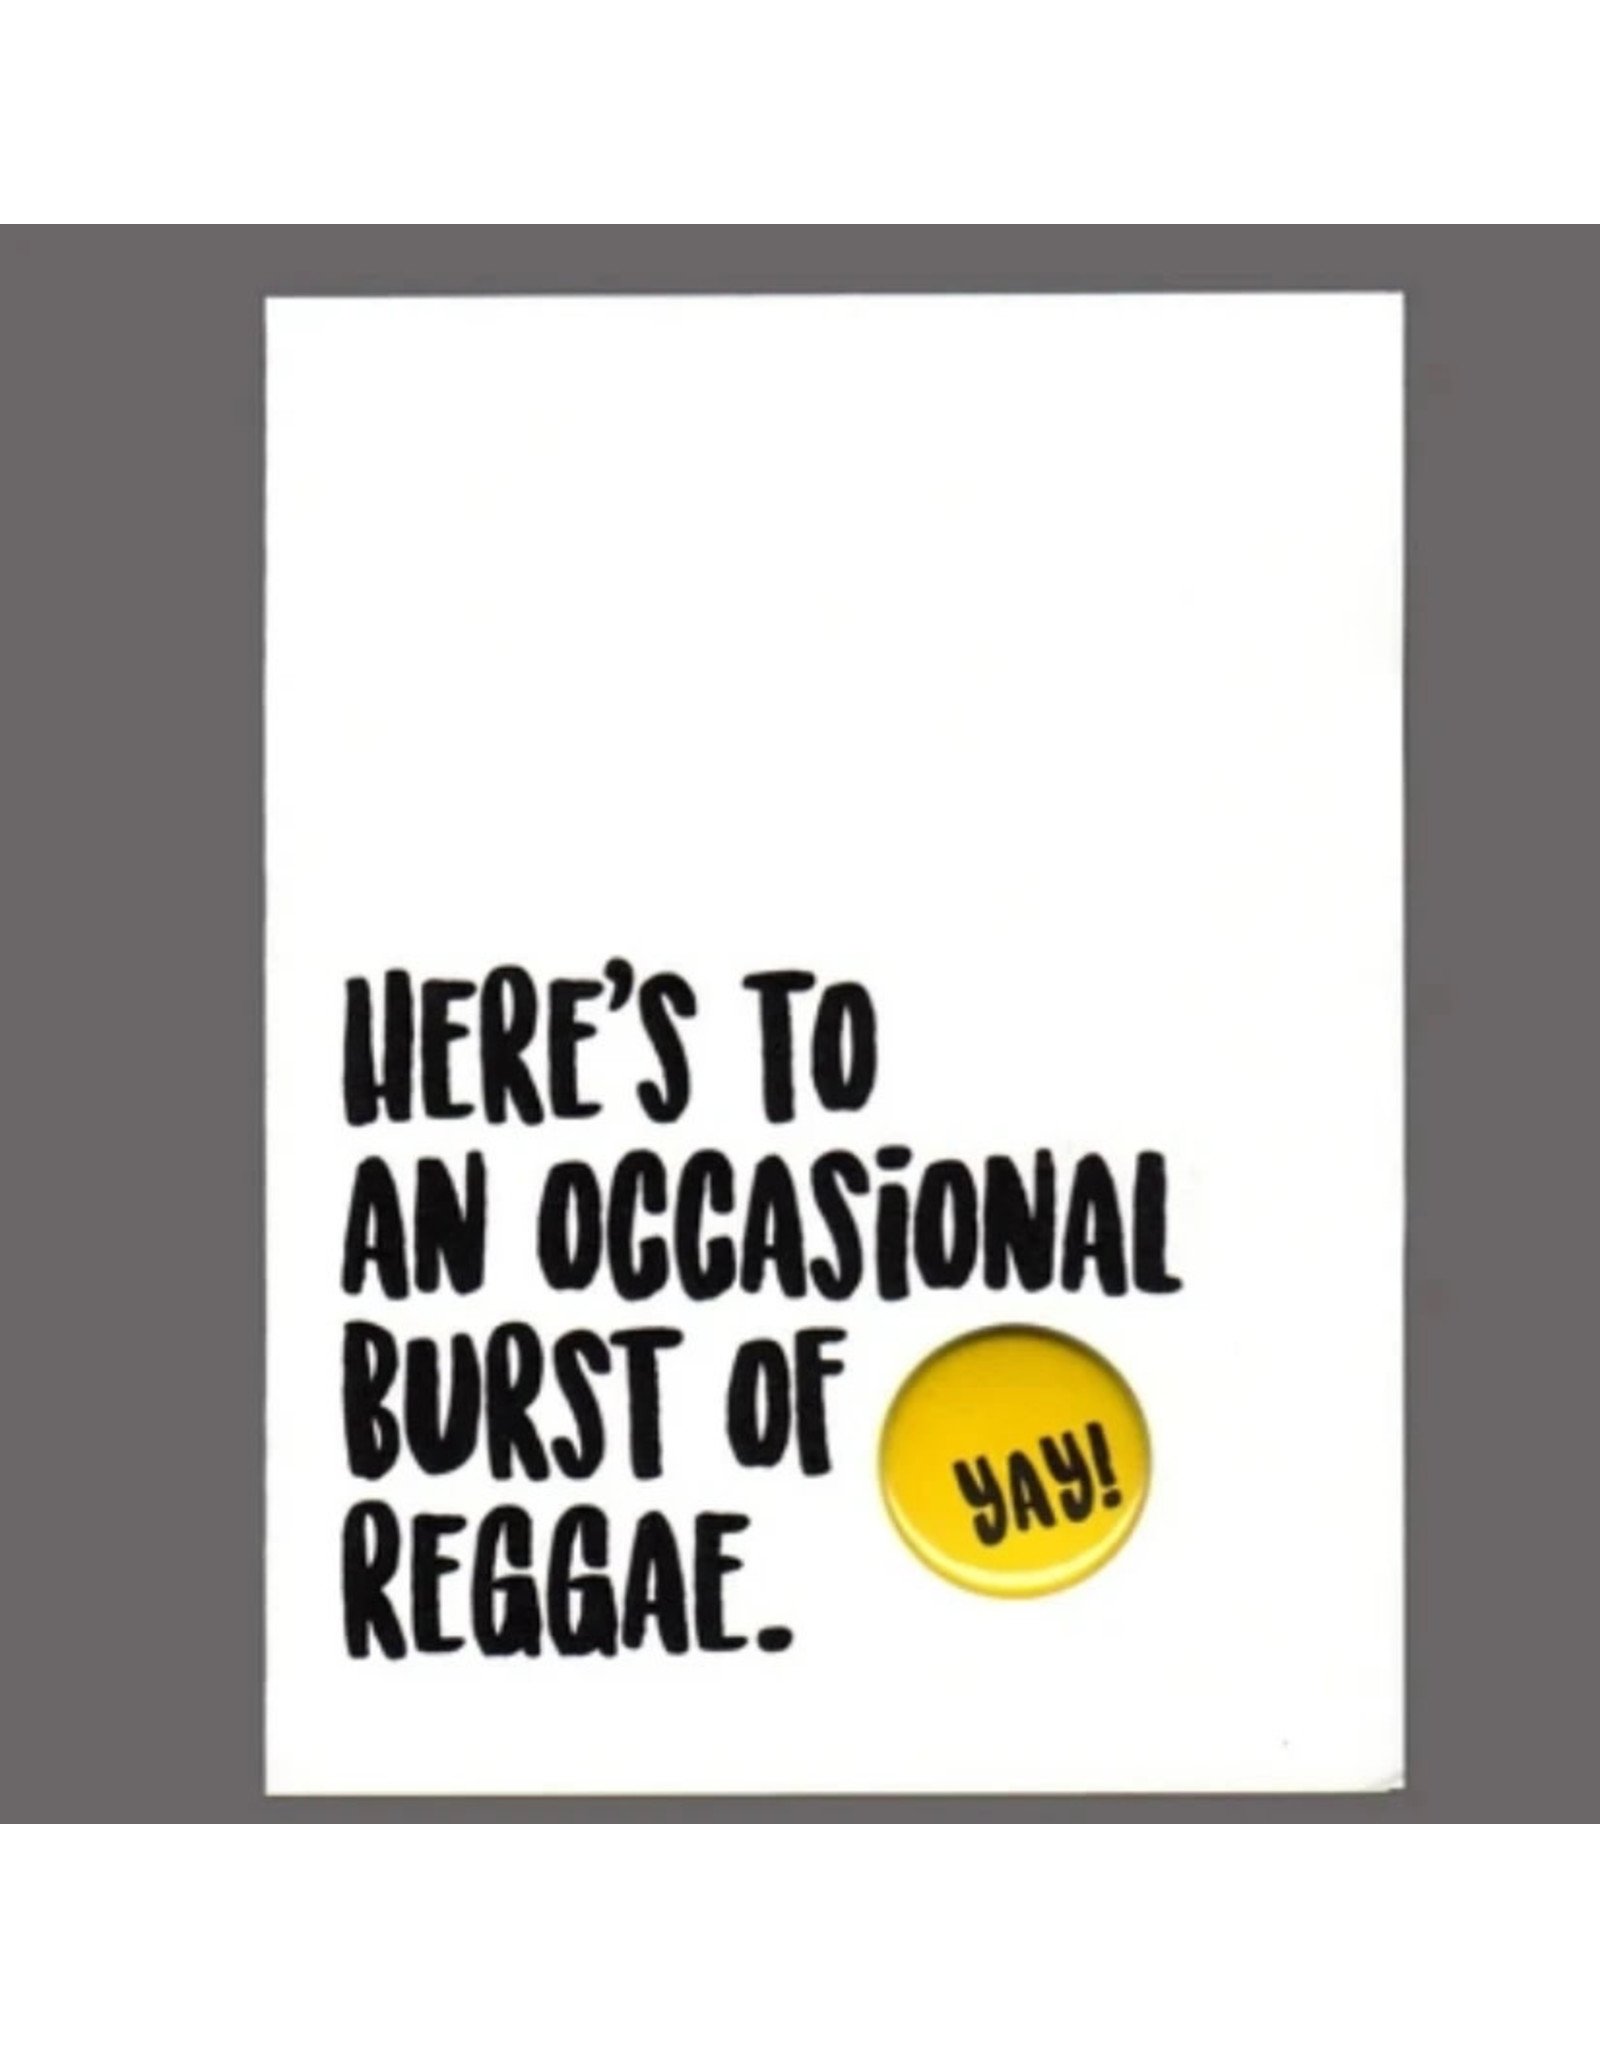 Greeting Card - "Here's to an Occasional Burst of Reggae"